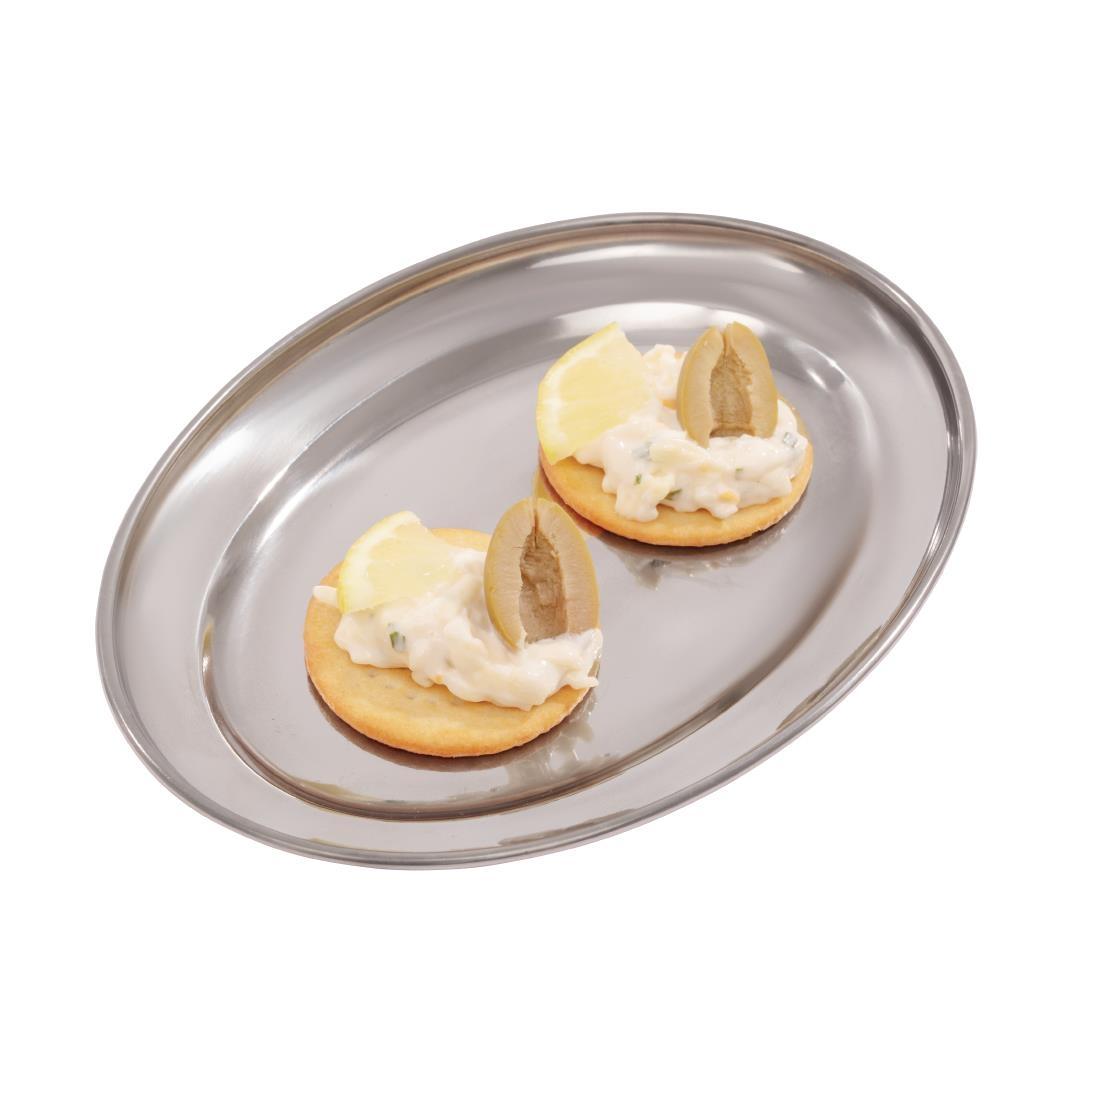 Olympia Stainless Steel Oval Serving Tray 200mm - K360  - 4